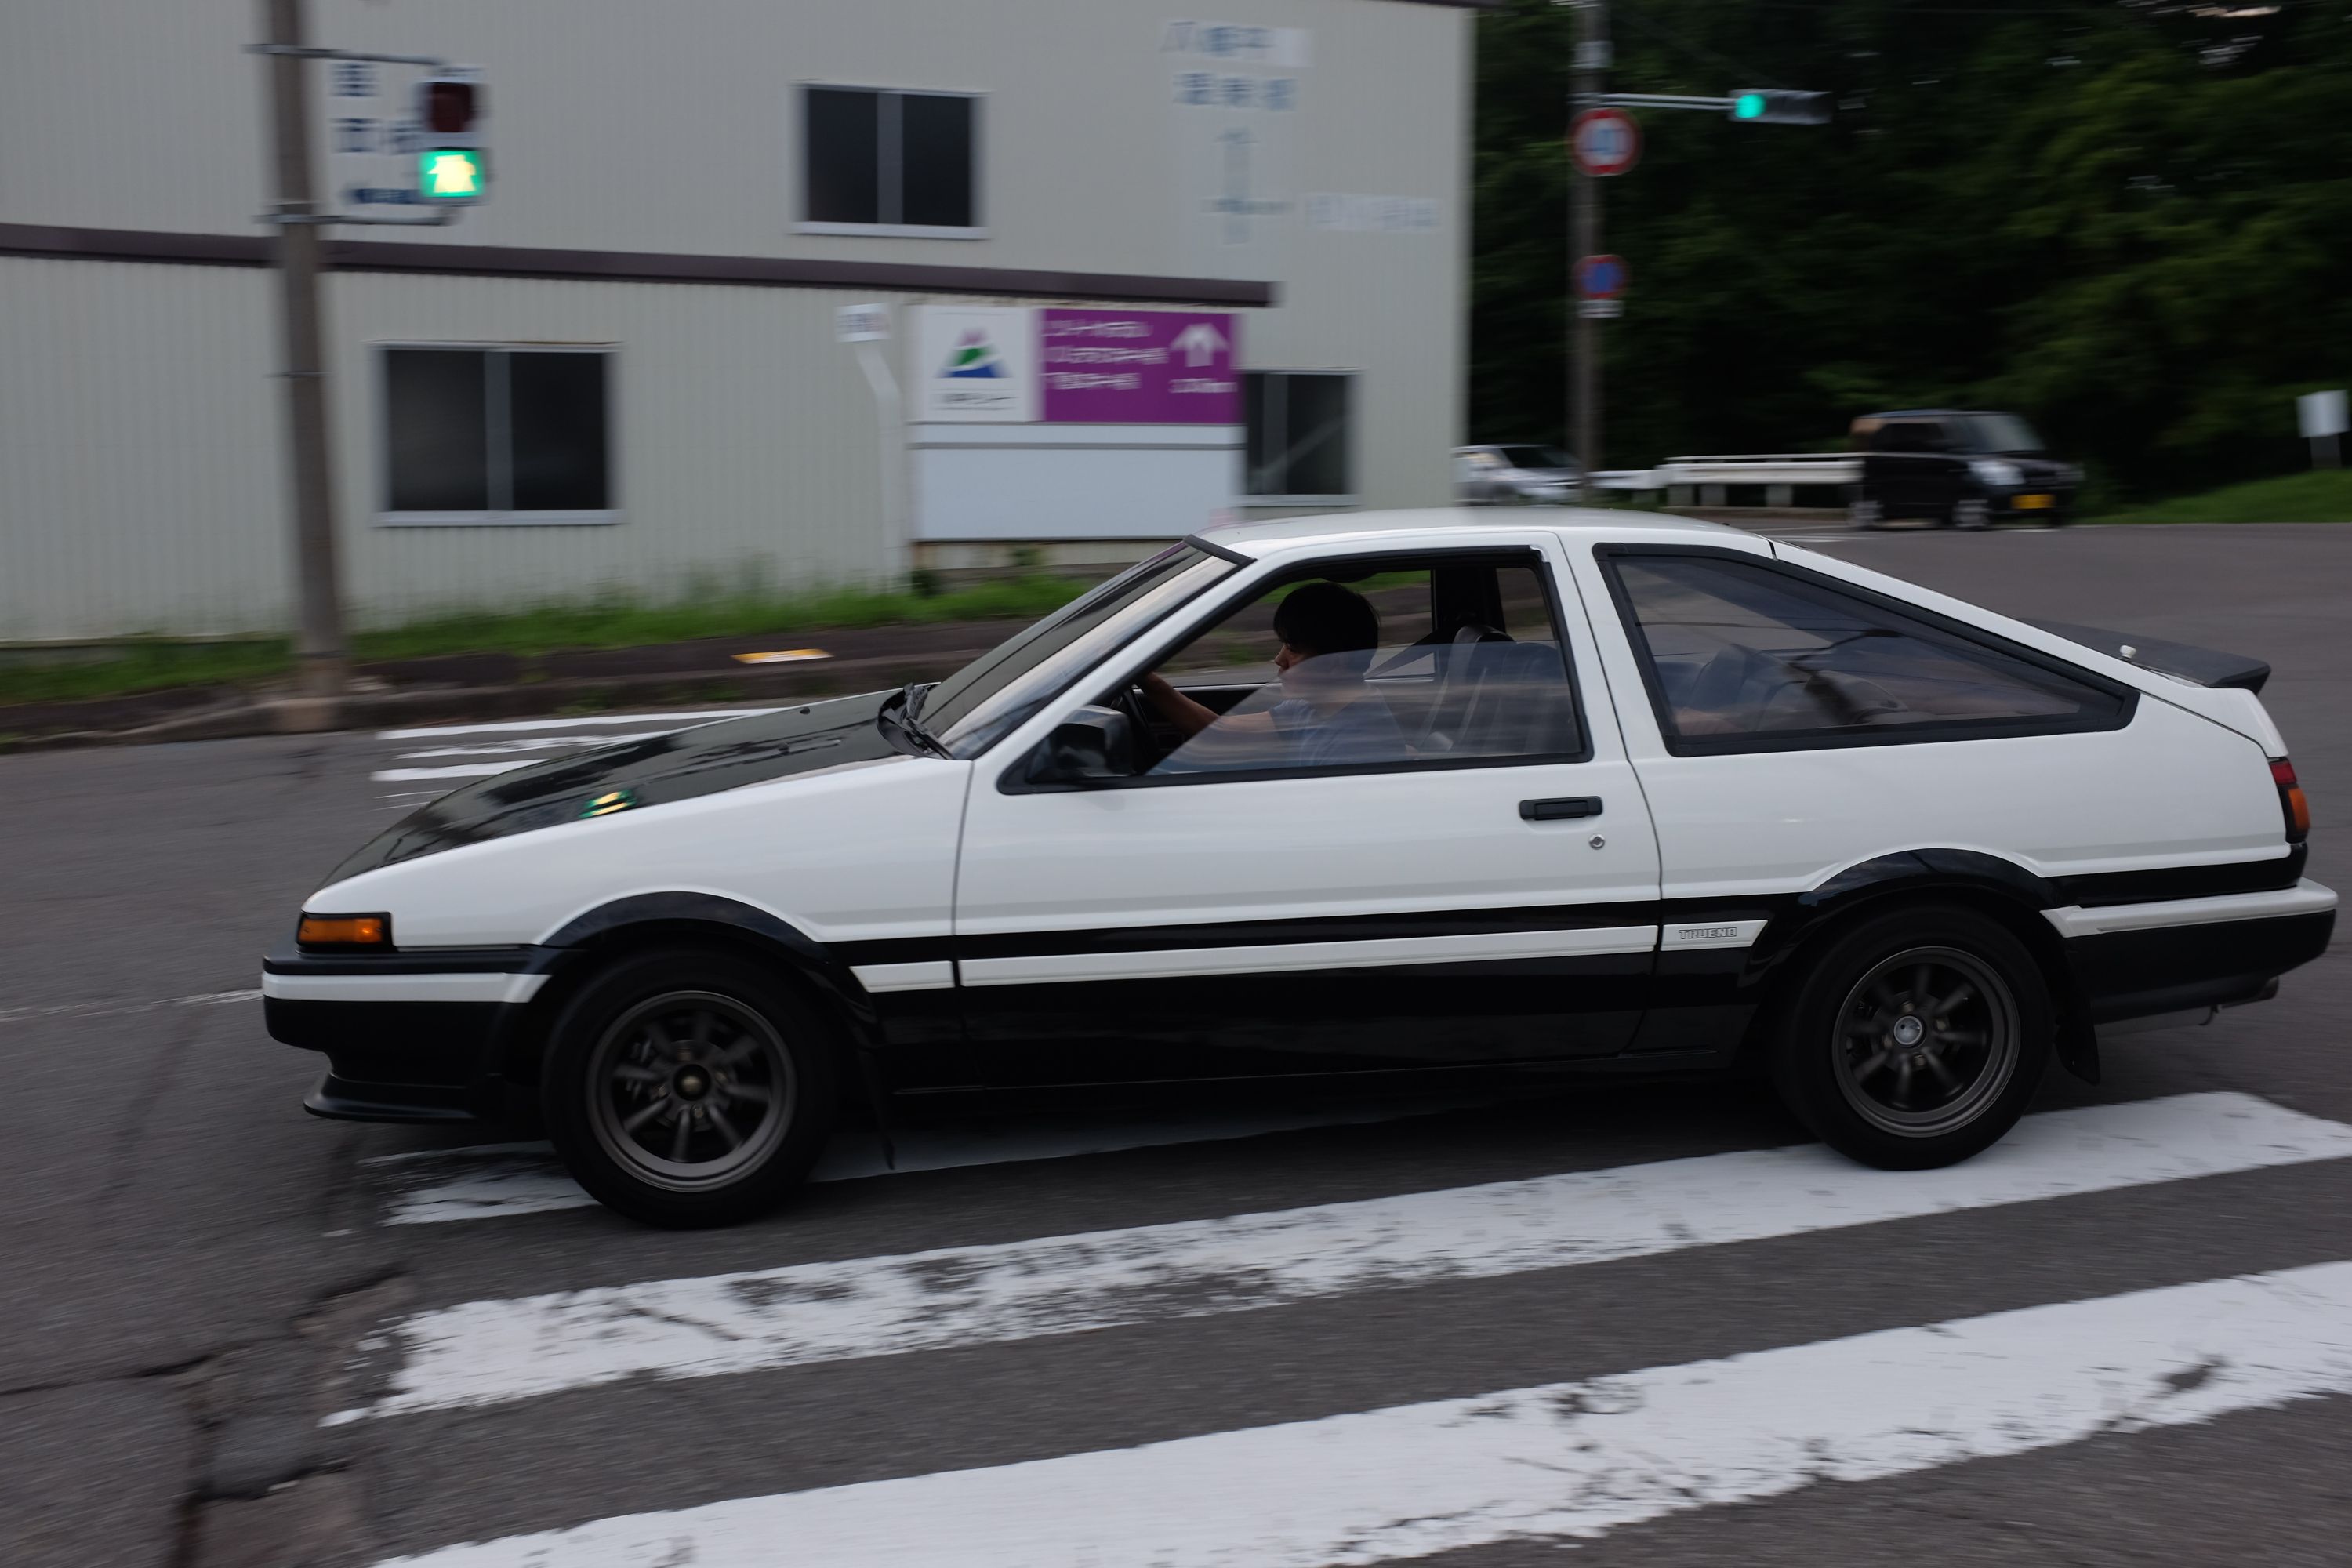 A Hachi-Roku, a black and white Toyota AE86 sports car, takes a turn across a pedestrian crossing.